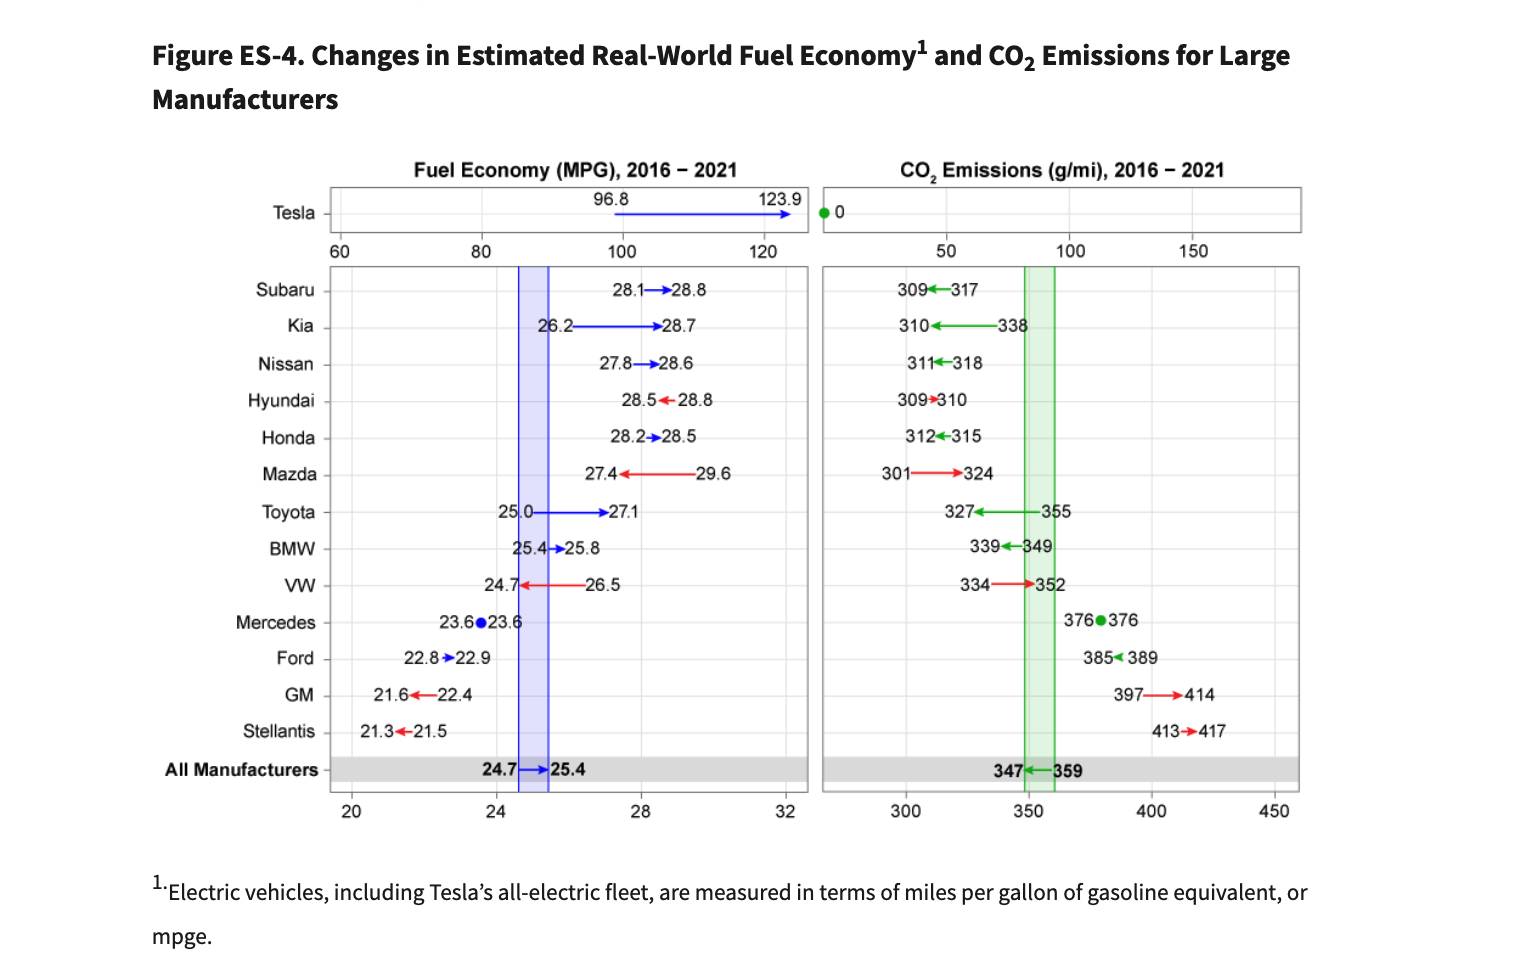 Changes in estimated real-world fuel economy (from EPA 2022 Automotive Trends Report)